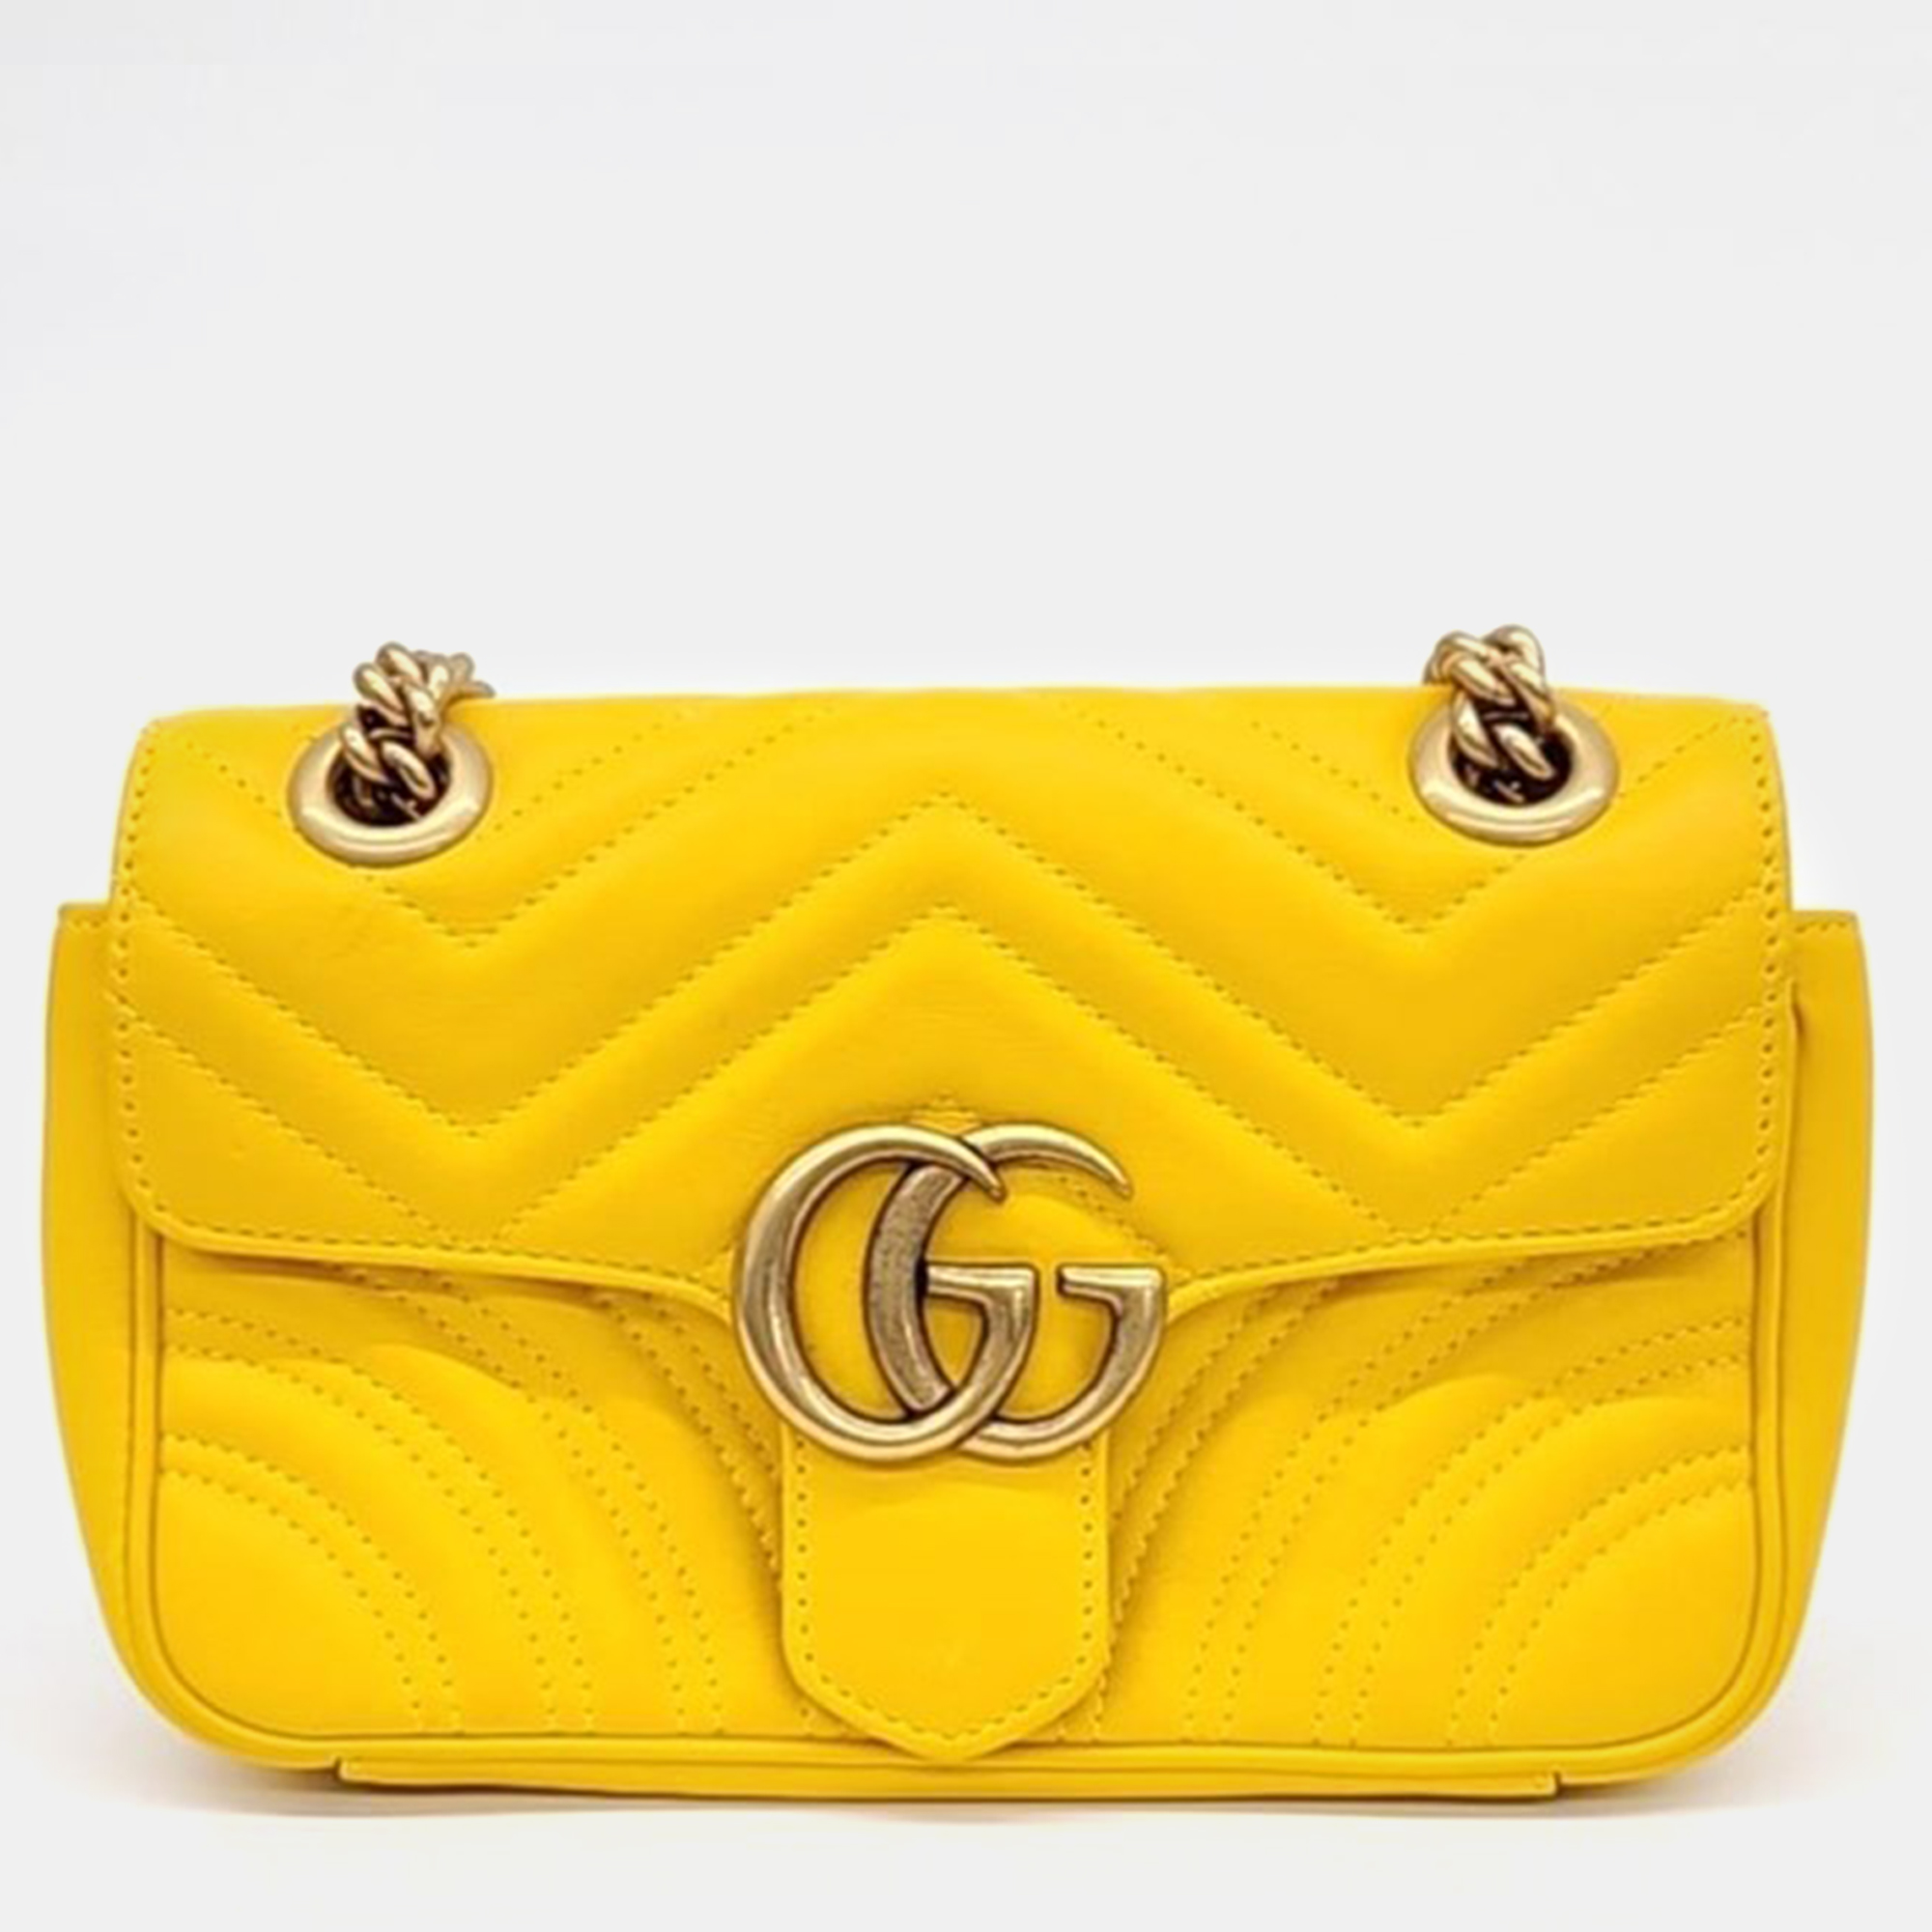 Gucci yellow quilted leather gg marmont mini shoulder bag